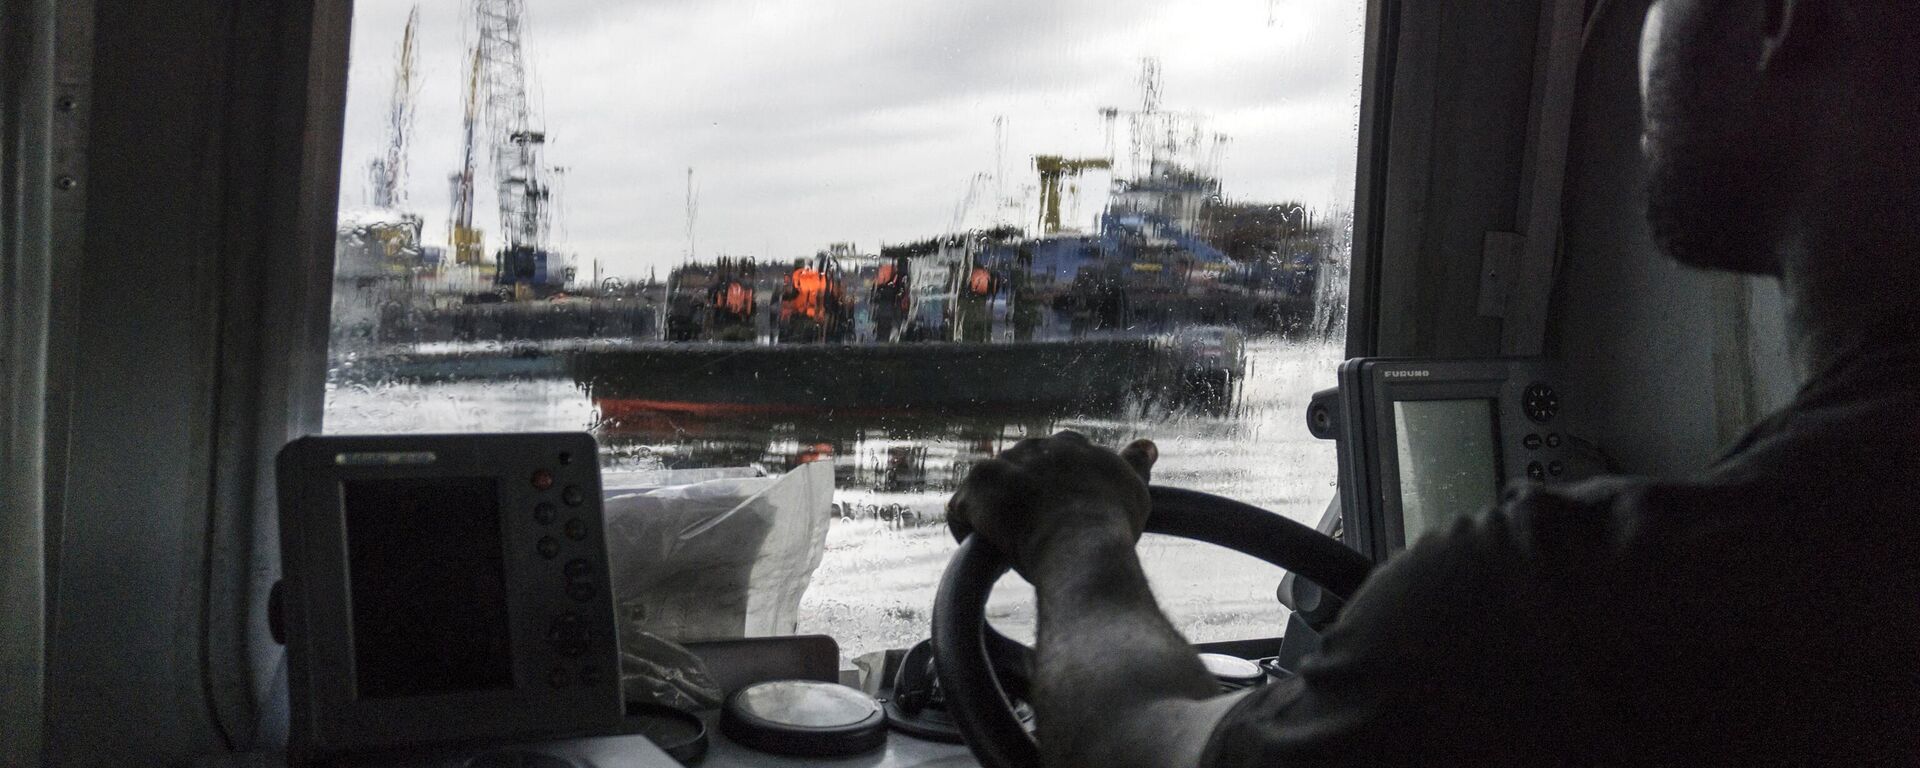 A member of the NNS Delta Of the Nigerian Navy forces steers a boat through the port area on April 19, 2017 in the Niger Delta region near the city of Port Harcourt. - Sputnik International, 1920, 12.11.2022